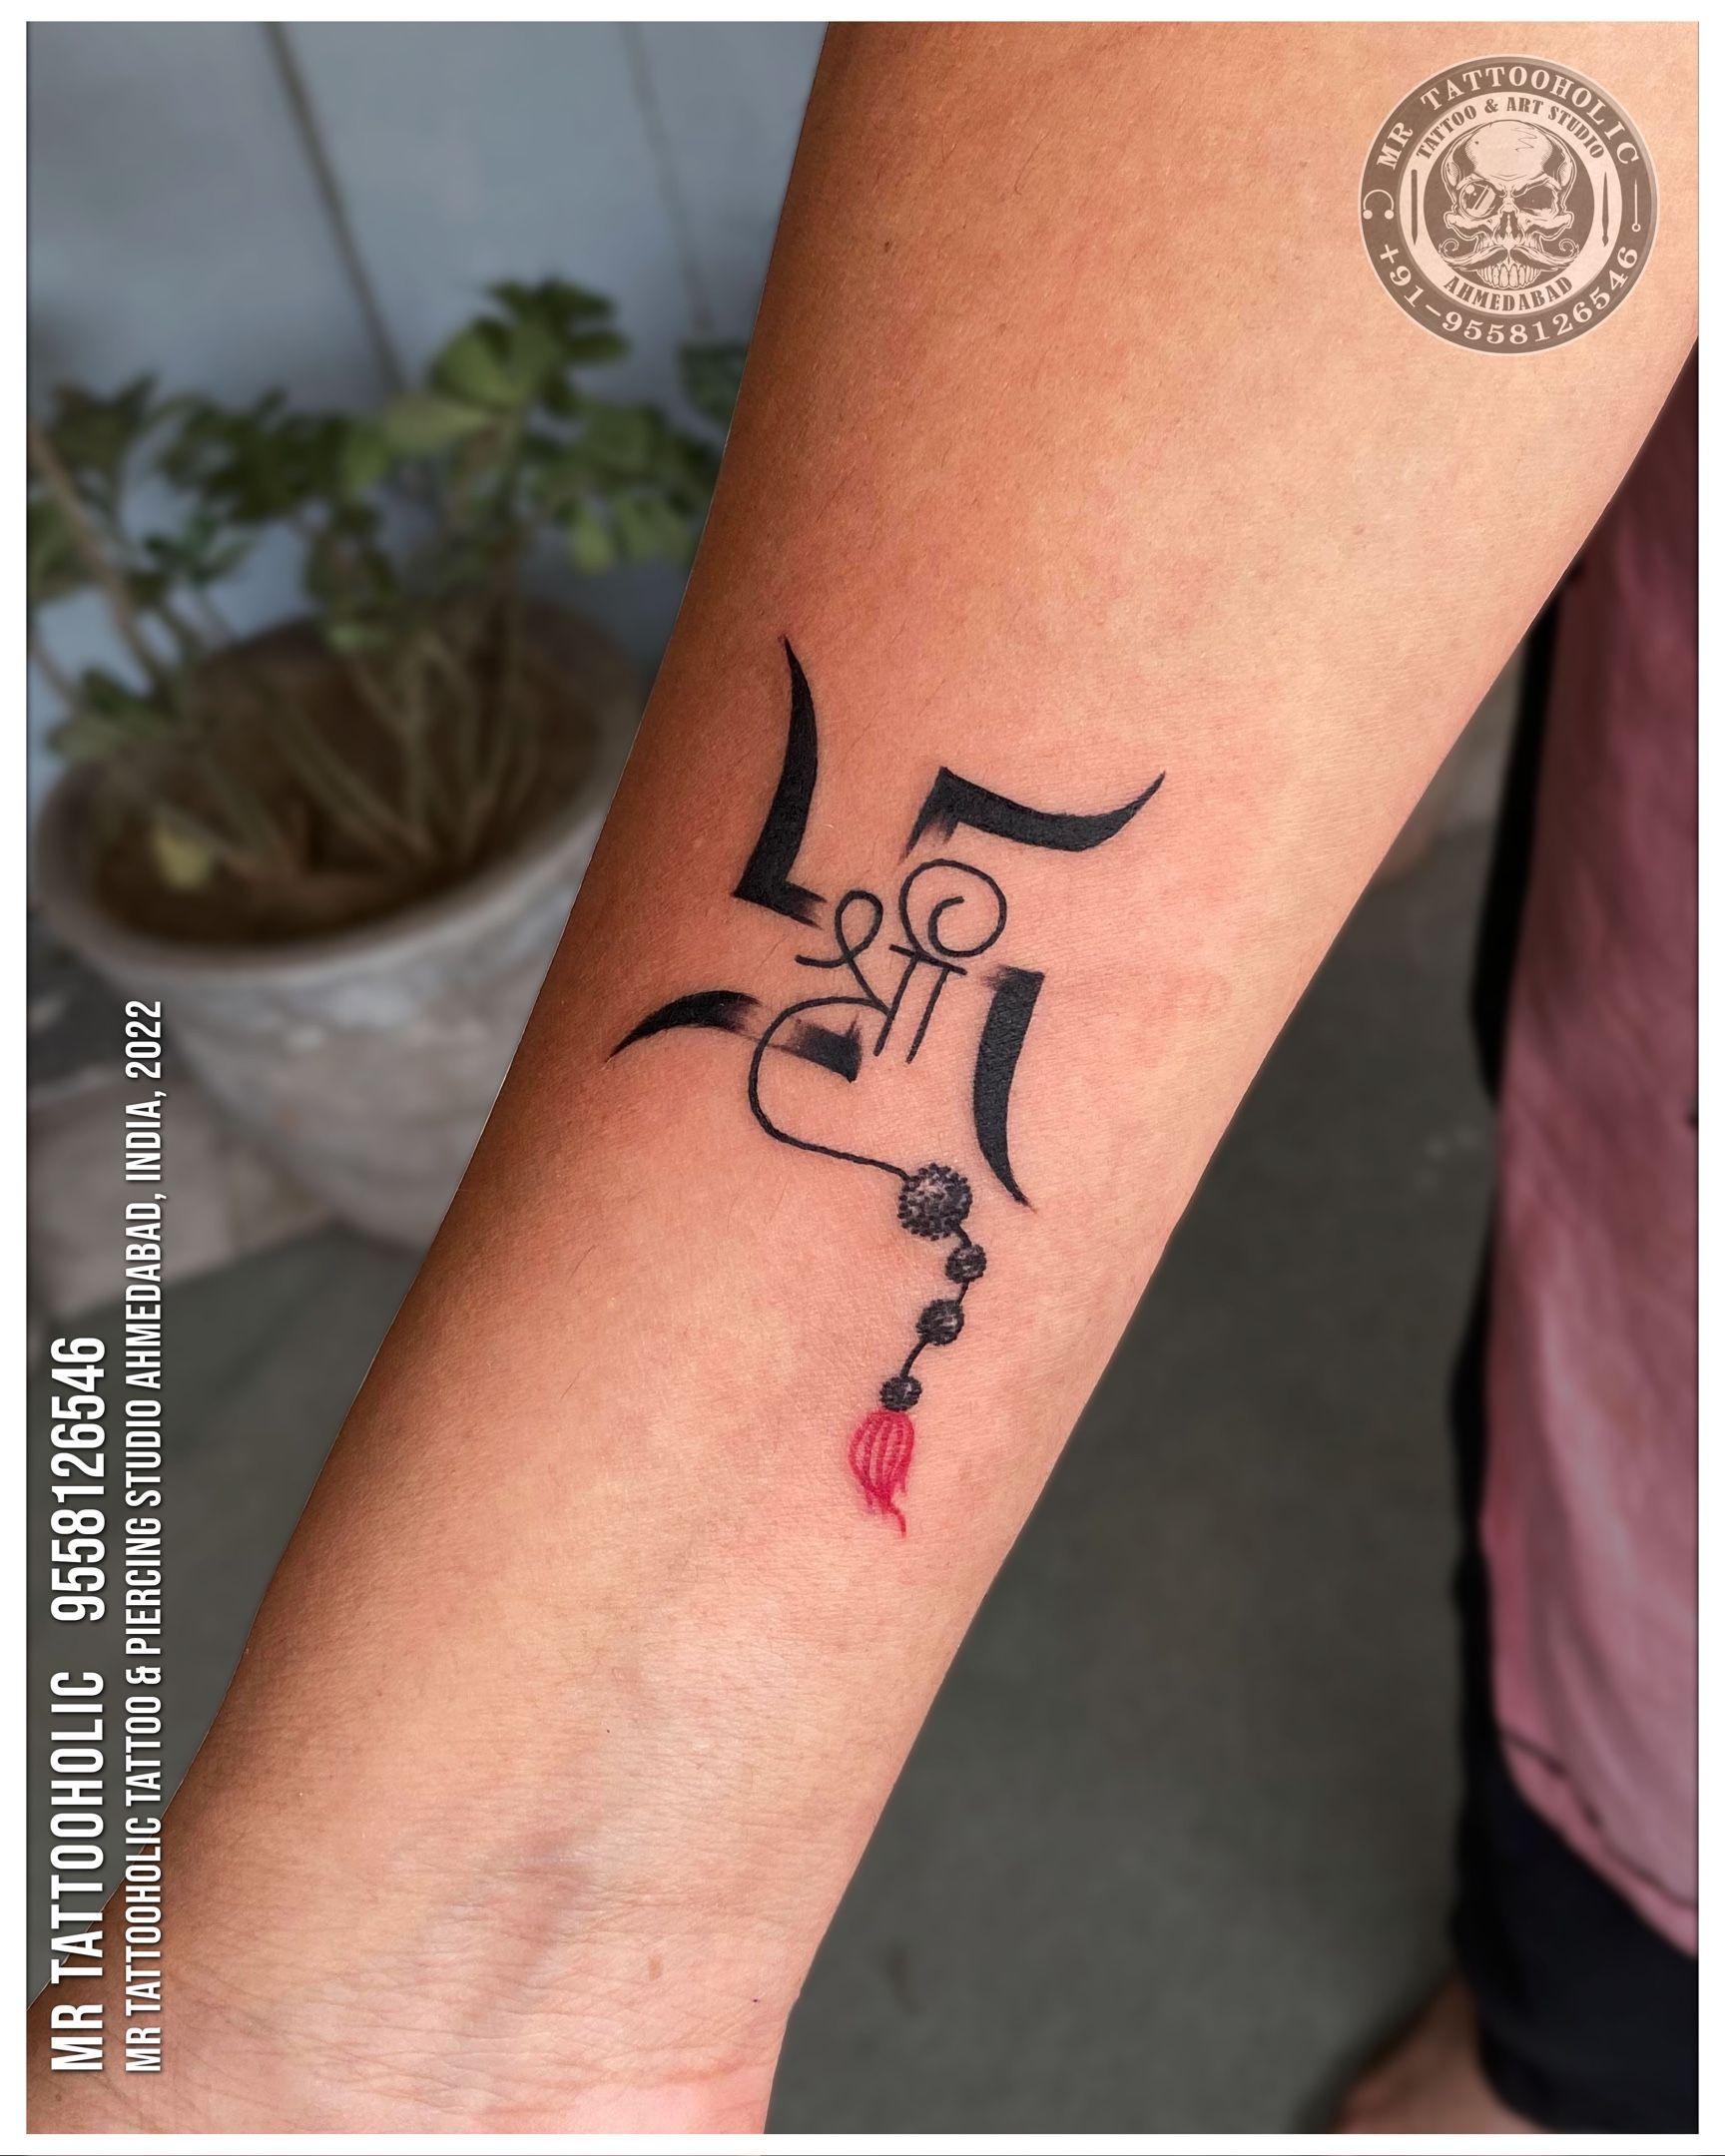 Mrs TattooStudio  permanenttattoos  आई artist  mrtattooraj Here  we are with wide range of our newest tattoo designs for you at very low  cost Stay connected with mrstattoostudio for offers 